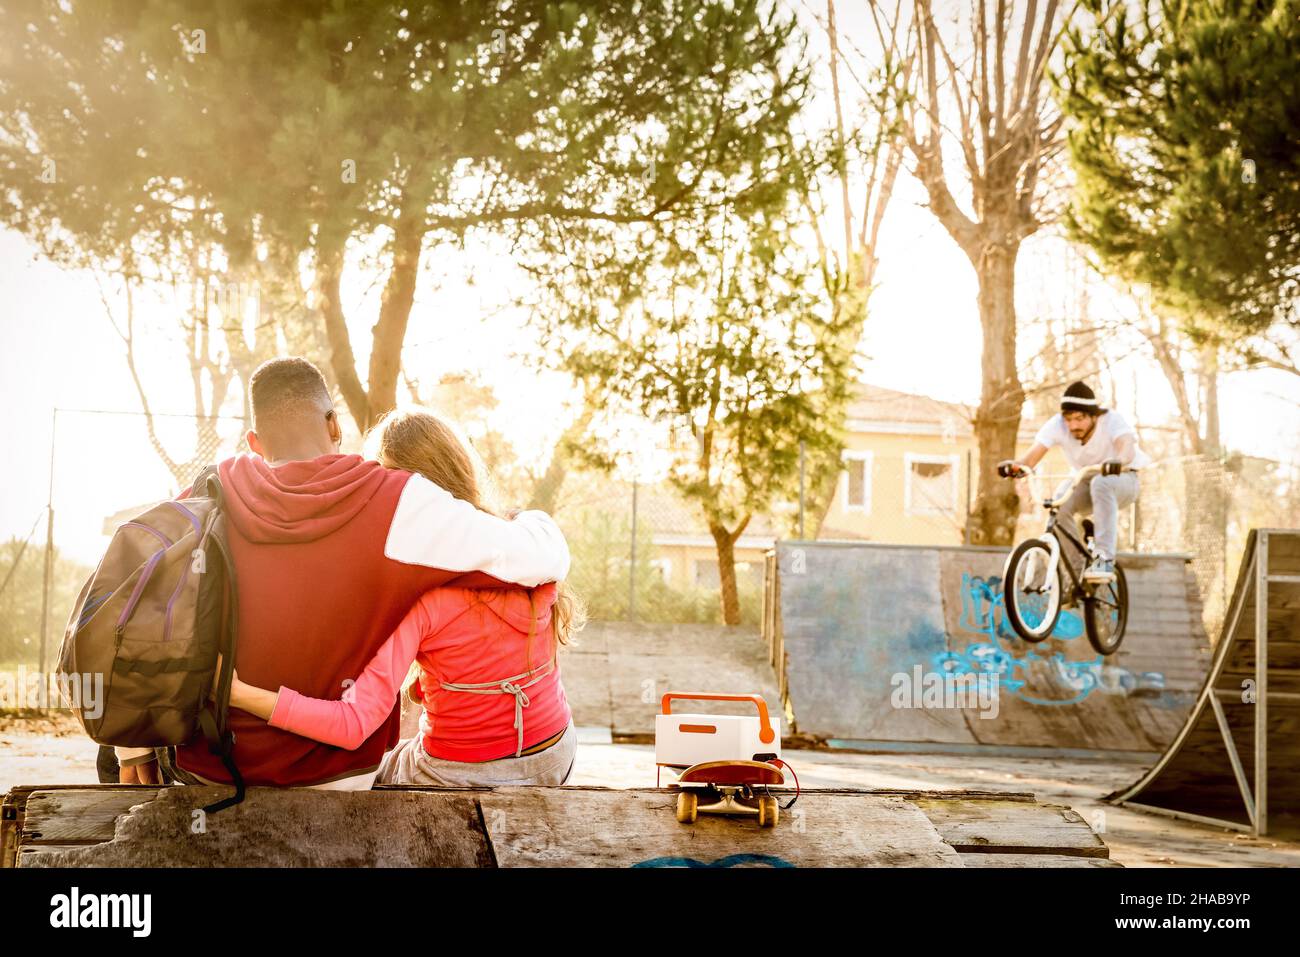 Multiracial couple in love sitting at skate park with music watching friends on bmx freestyle exhibition - Urban relationship concept Stock Photo